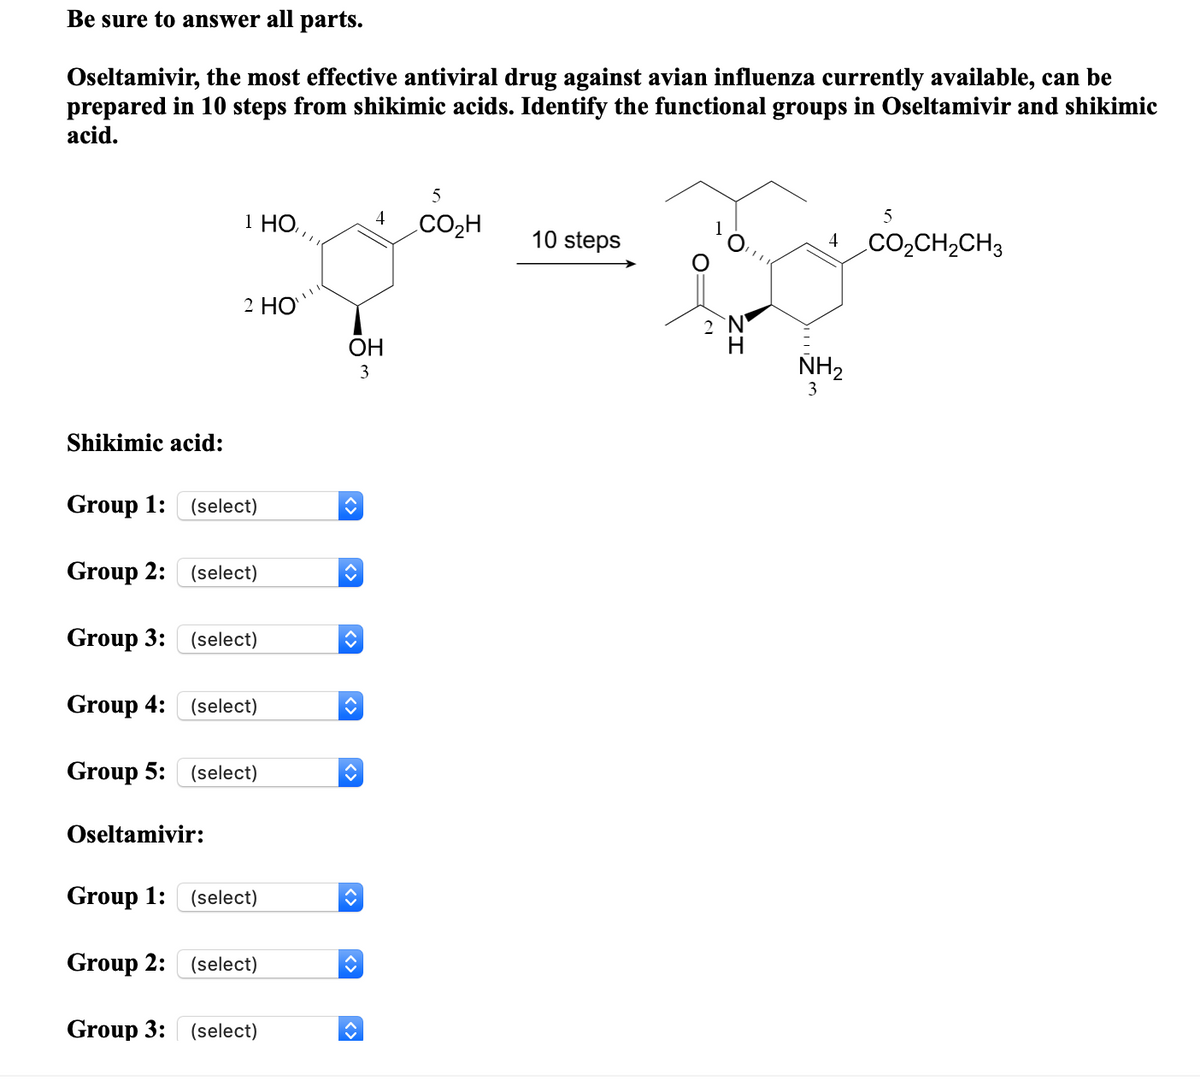 Be sure to answer all parts.
Oseltamivir, the most effective antiviral drug against avian influenza currently available, can be
prepared in 10 steps from shikimic acids. Identify the functional groups in Oseltamivir and shikimic
acid.
1 HO,
4
.CO2H
10 steps
4
CO2CH,CH3
2 НО
2 N
H
ОН
NH2
3
3
Shikimic acid:
Group 1:
(select)
Group 2: (select)
Group 3:
(select)
Group 4:
(select)
Group 5: (select)
Oseltamivir:
Group 1: (select)
Group 2:
(select)
Group 3:
(select)
